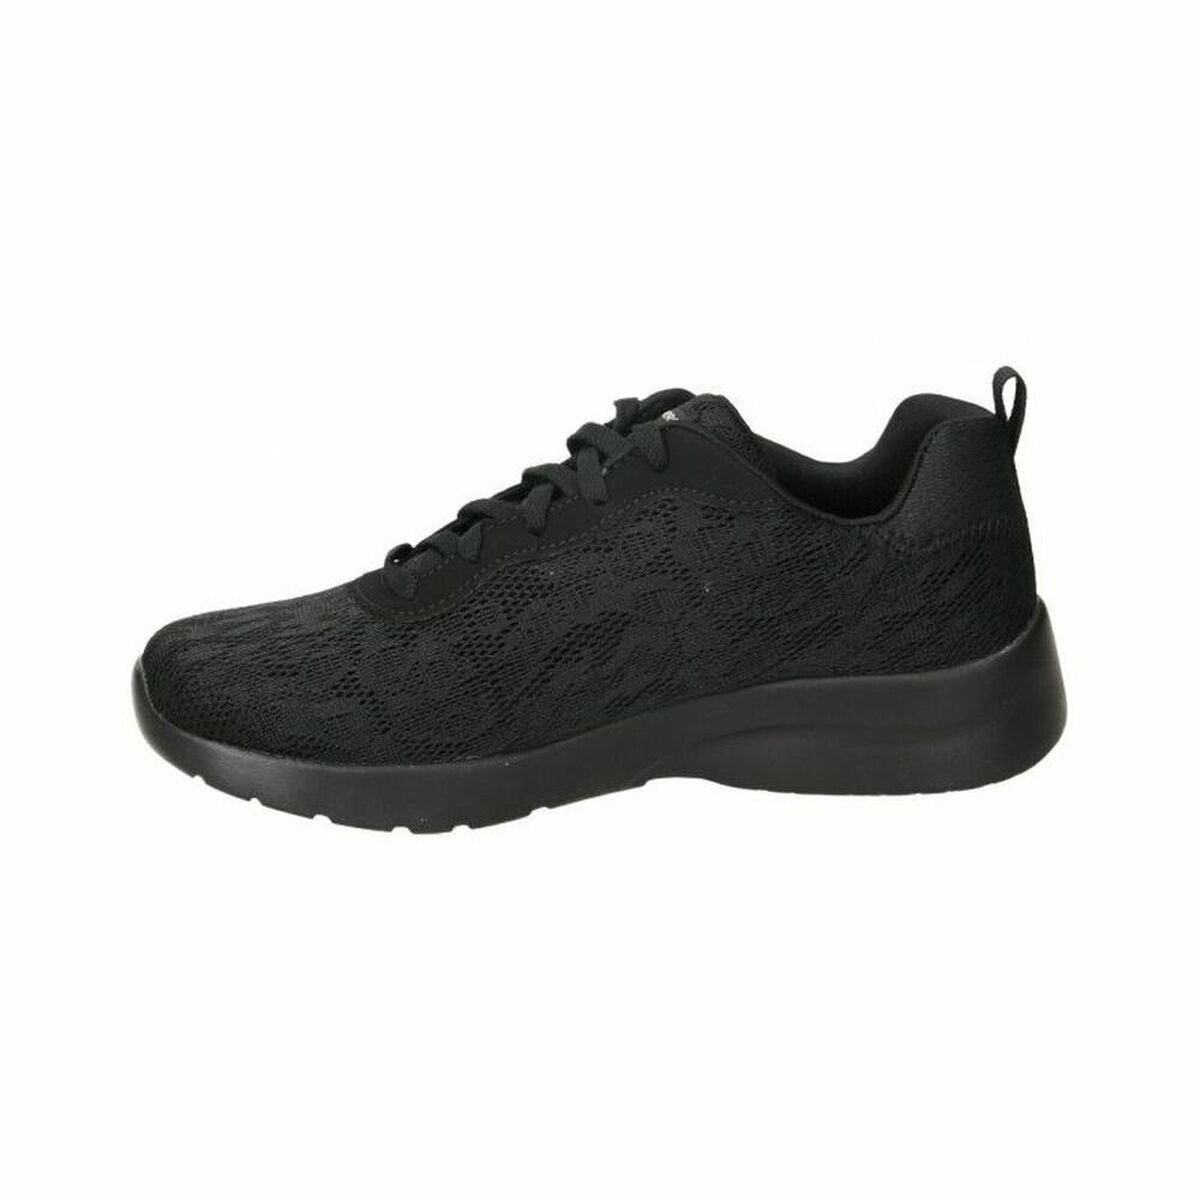 Sports Trainers for Women Skechers Floral Mesh Lace Up W Black